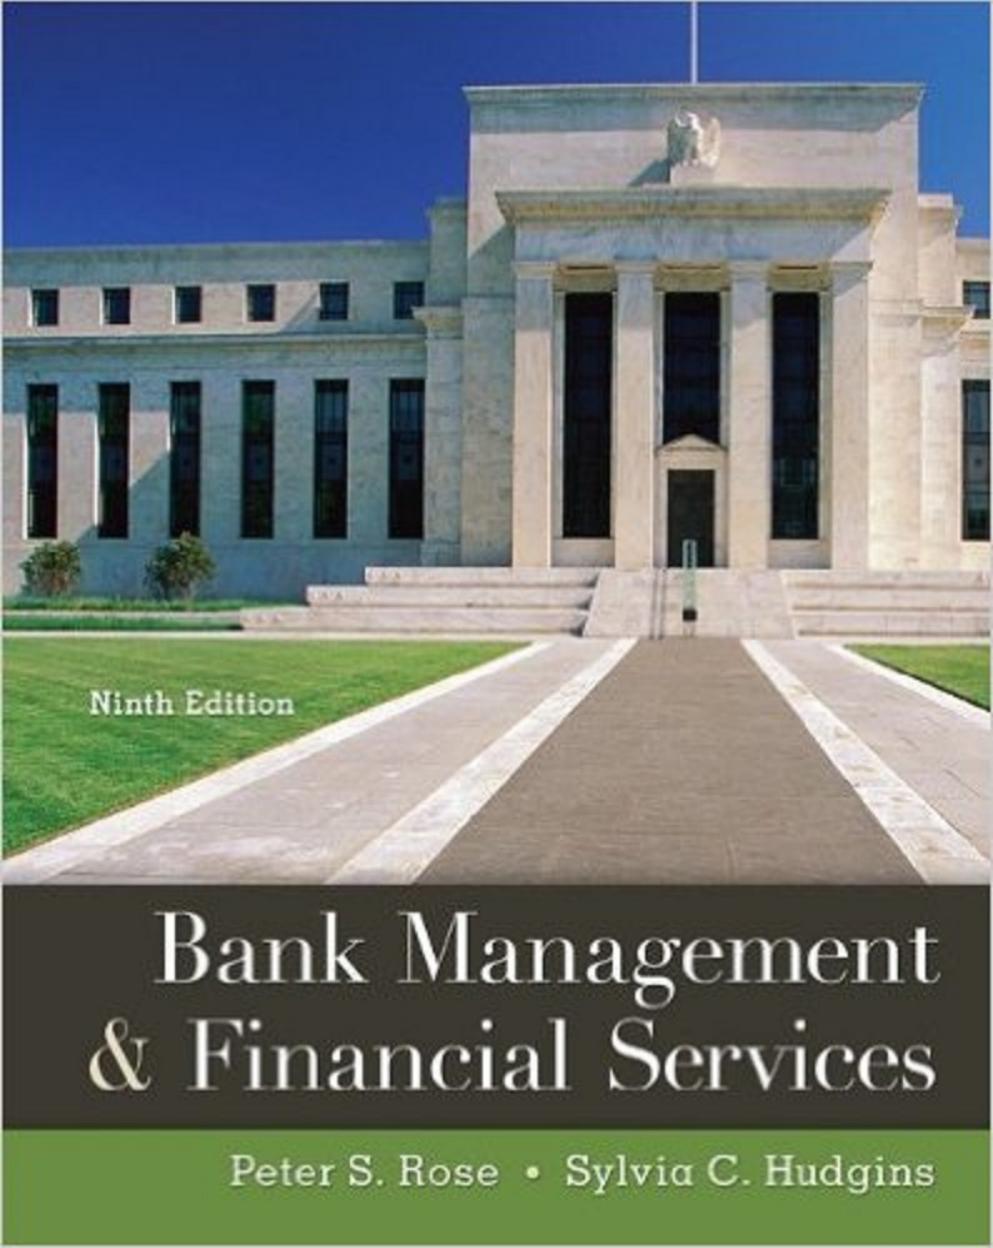 Bank Management and Financial Services, 9th Edition - Administrator.jpg